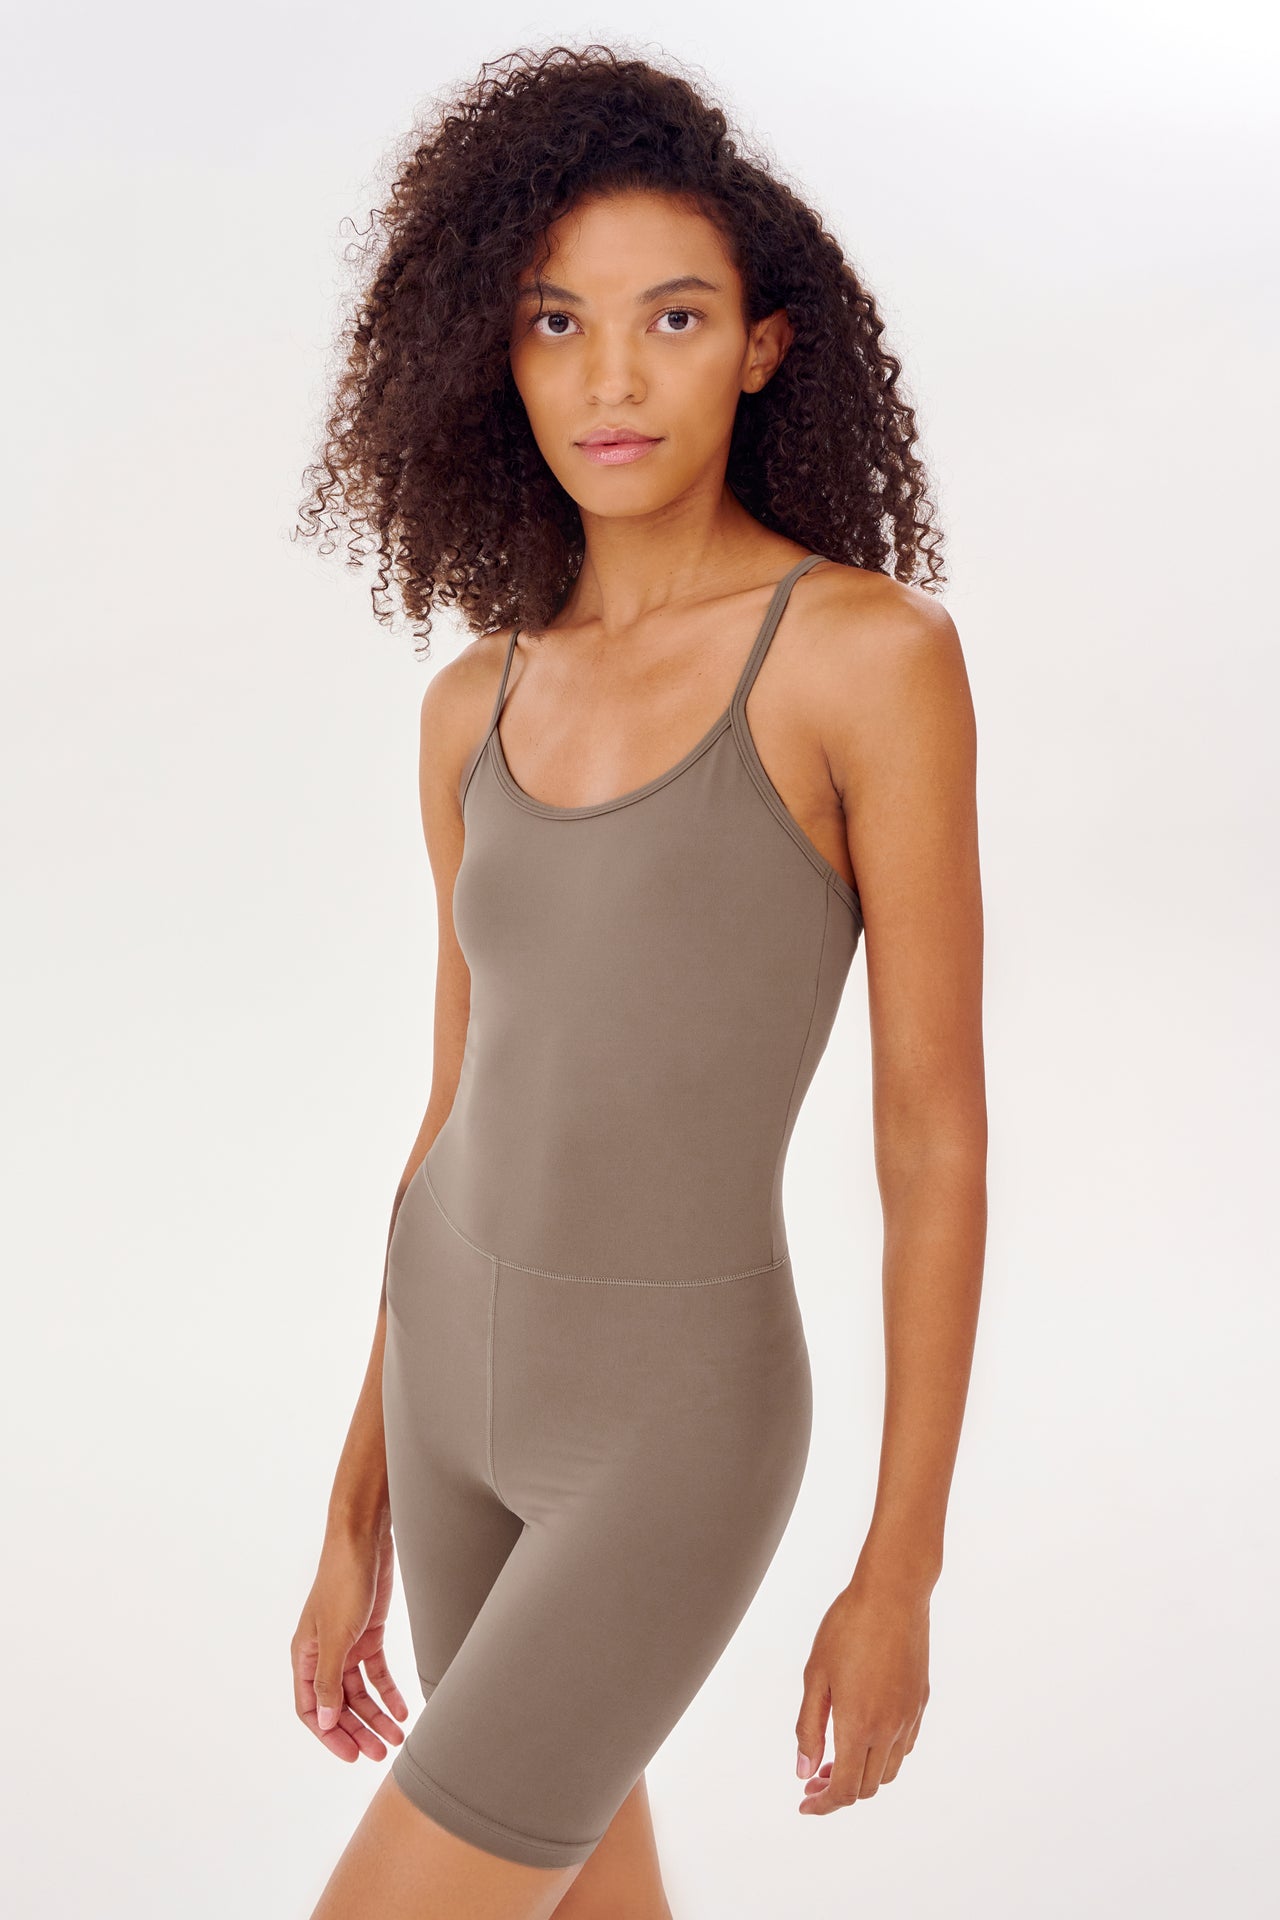 A woman in a tight brown Airweight 6” Short Jumpsuit made by SPLITS59.